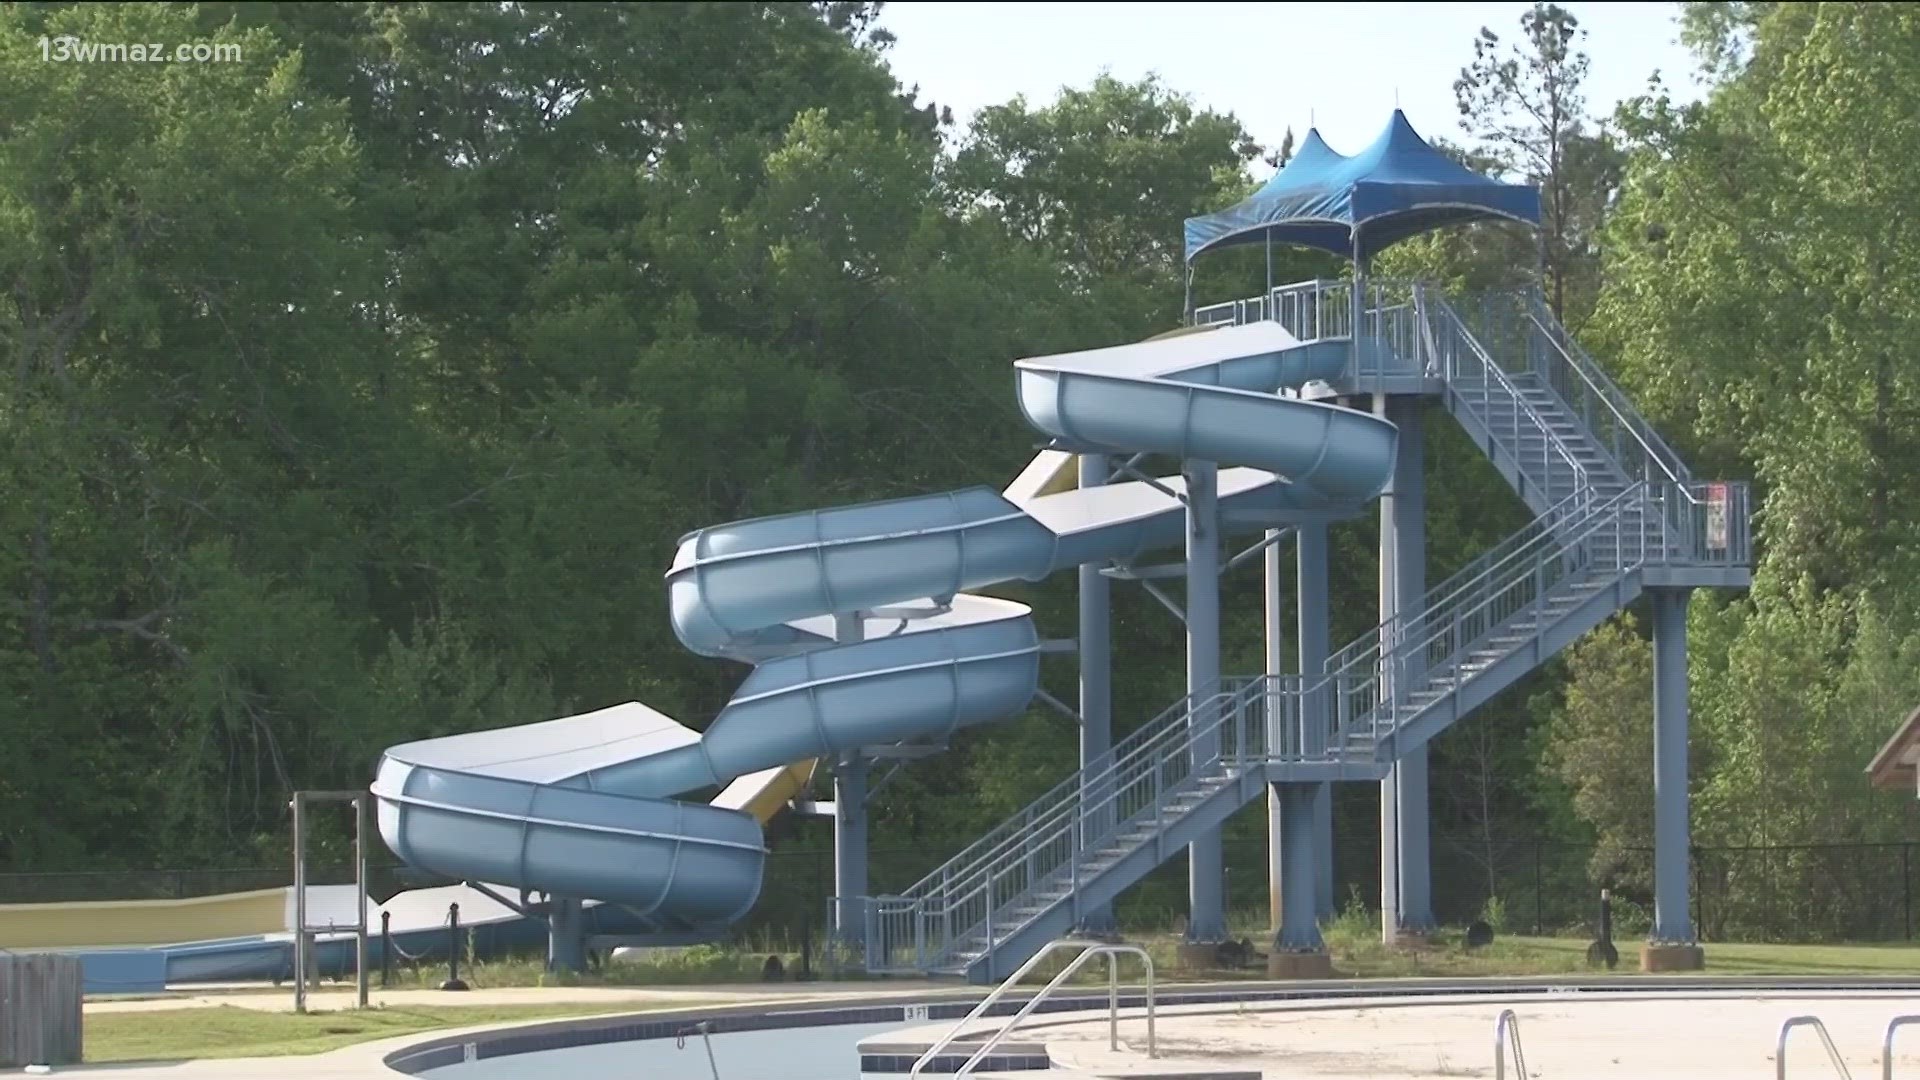 It first opened in 2015 and now Bibb County’s Sandy Beach Water Park says it is officially closed, according to a post on its official Facebook page.